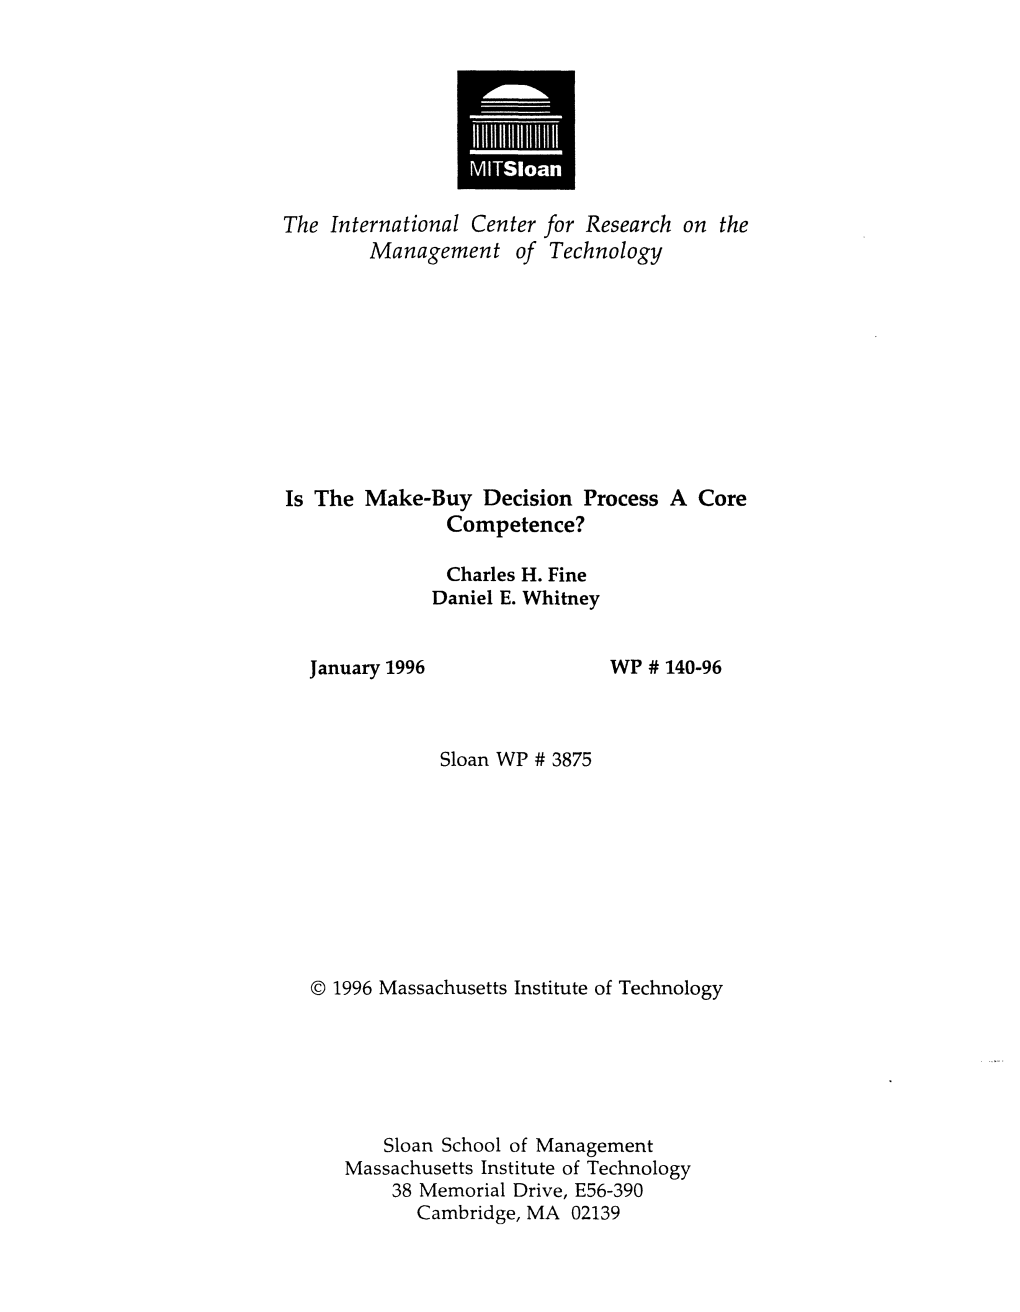 The International Center for Research on the Management of Technology